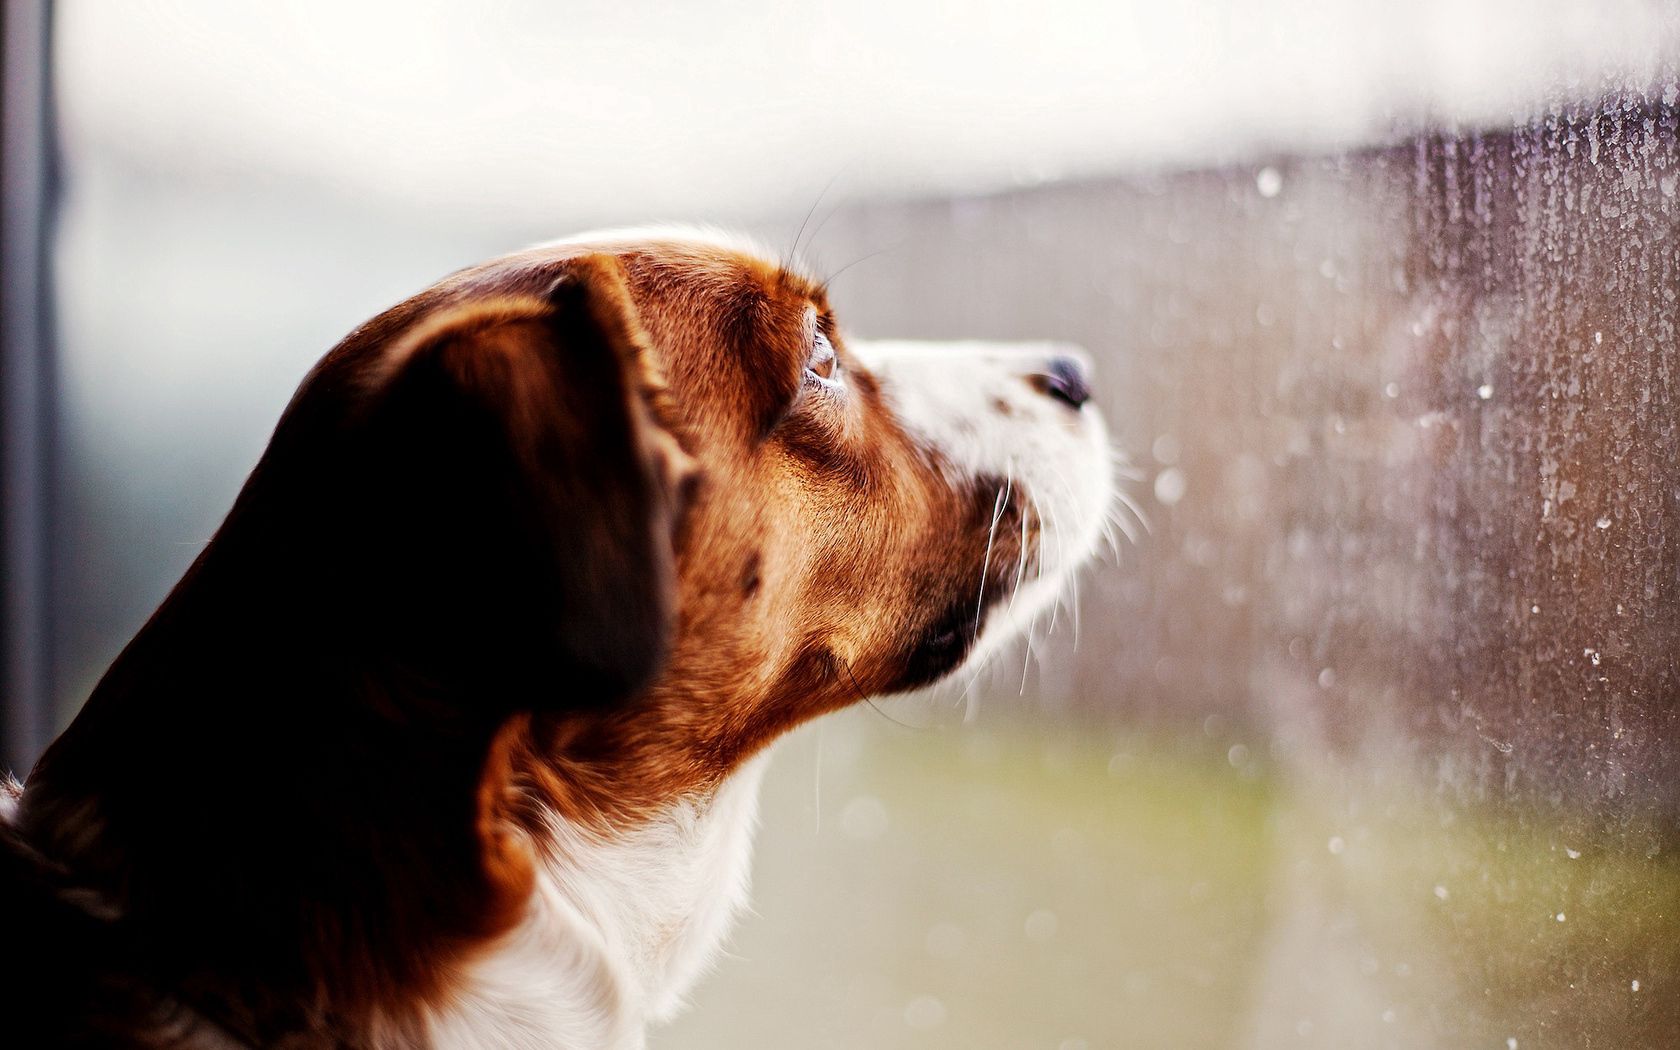 Wallpaper for mobile devices drops, dog, window, rain